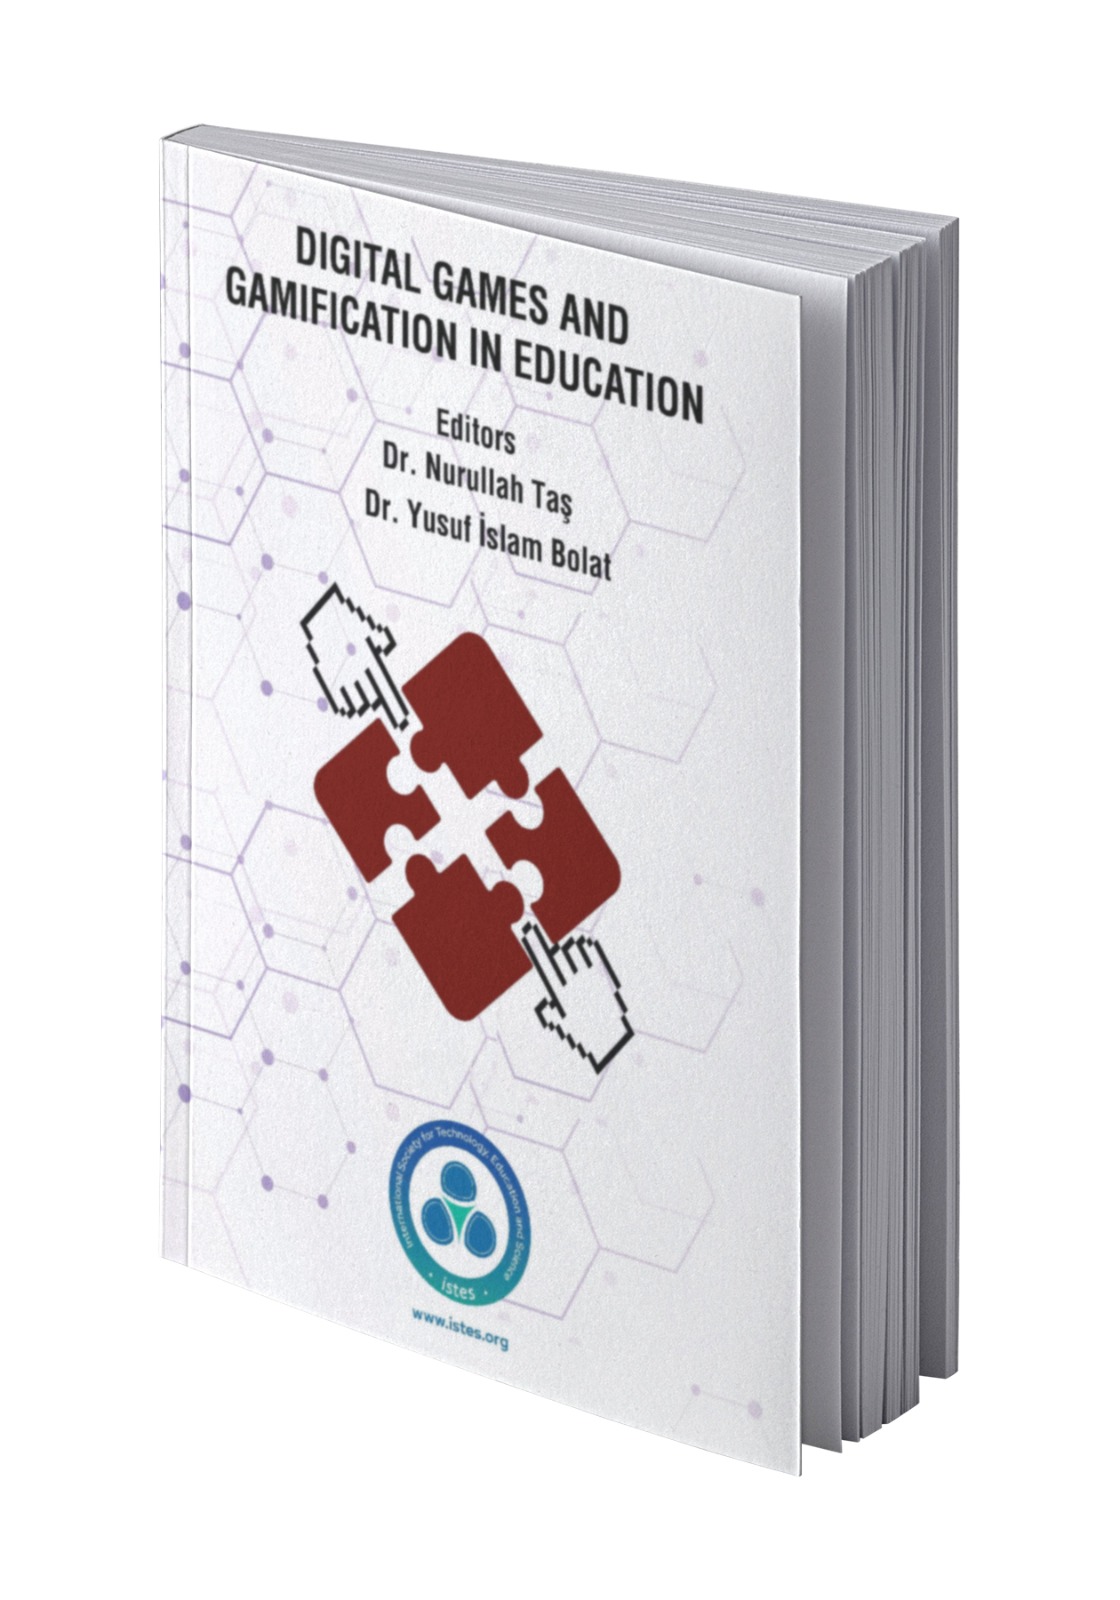 Digital Games and Gamification in Education